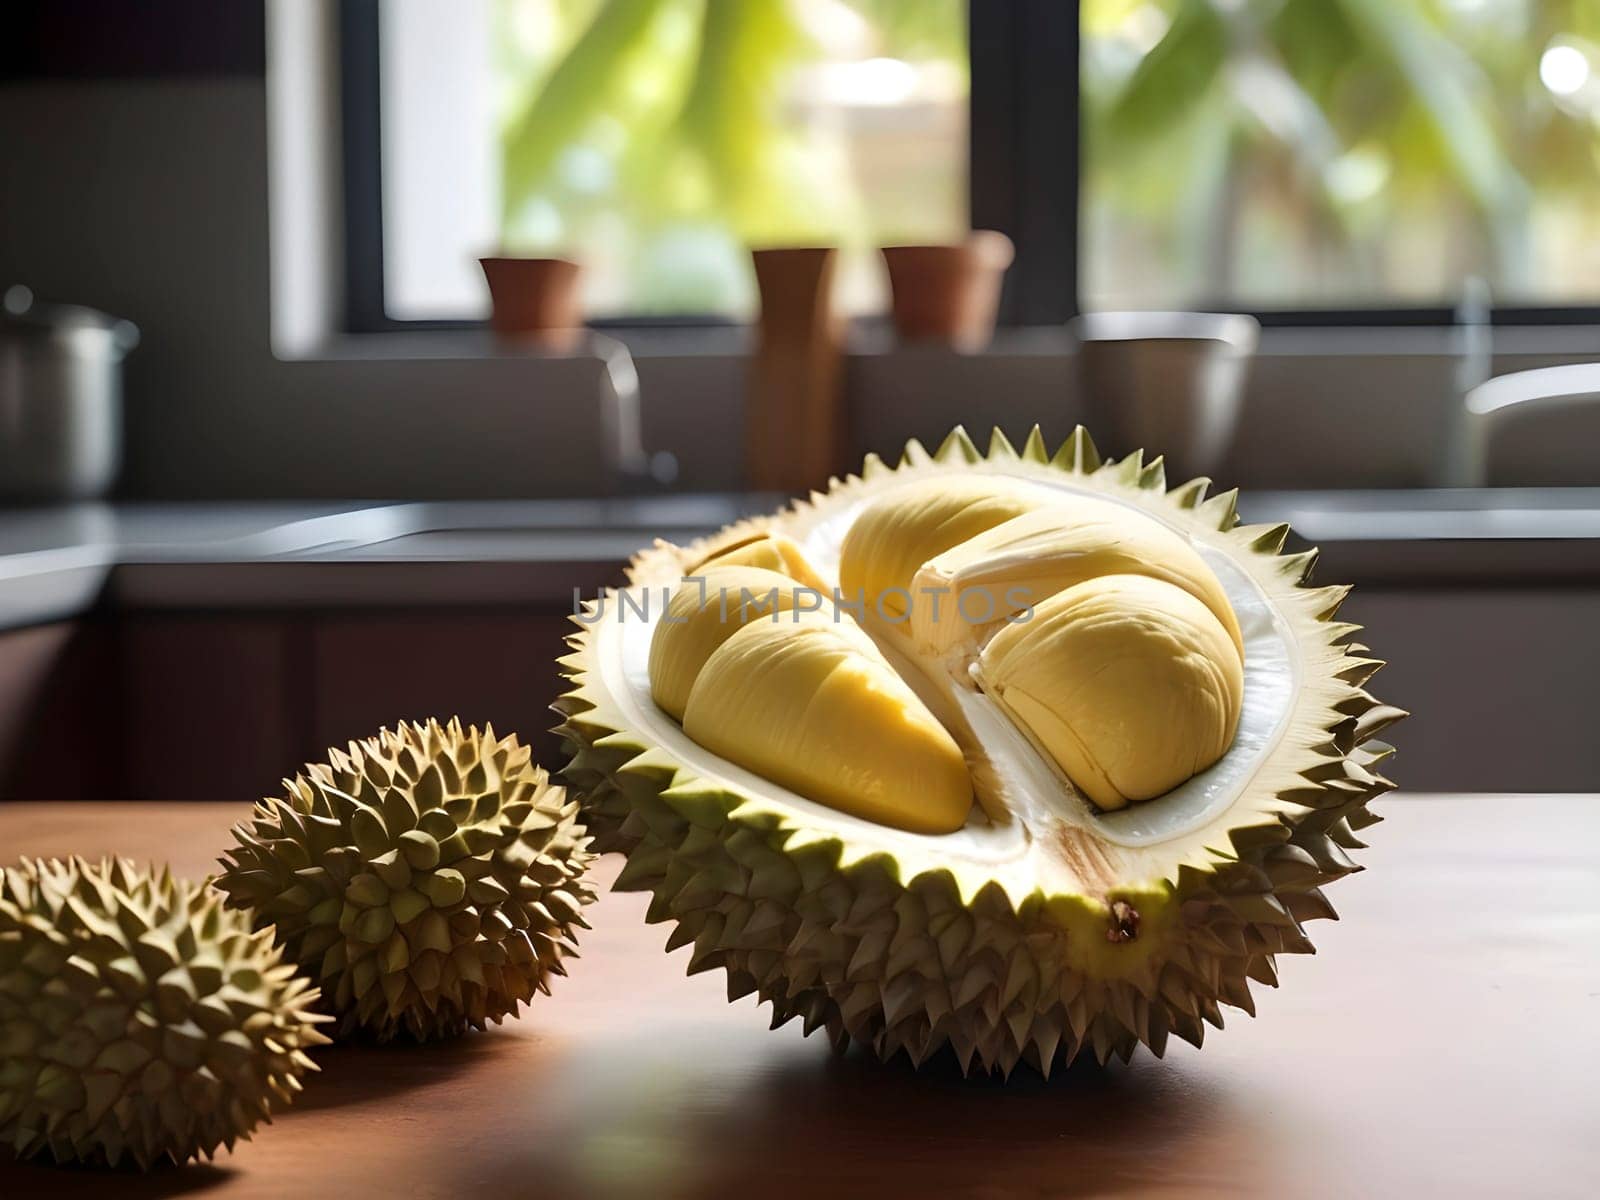 Golden Hour Feast: Durian Spotlight in a Cozy Kitchen Bathed in Afternoon Warmth.